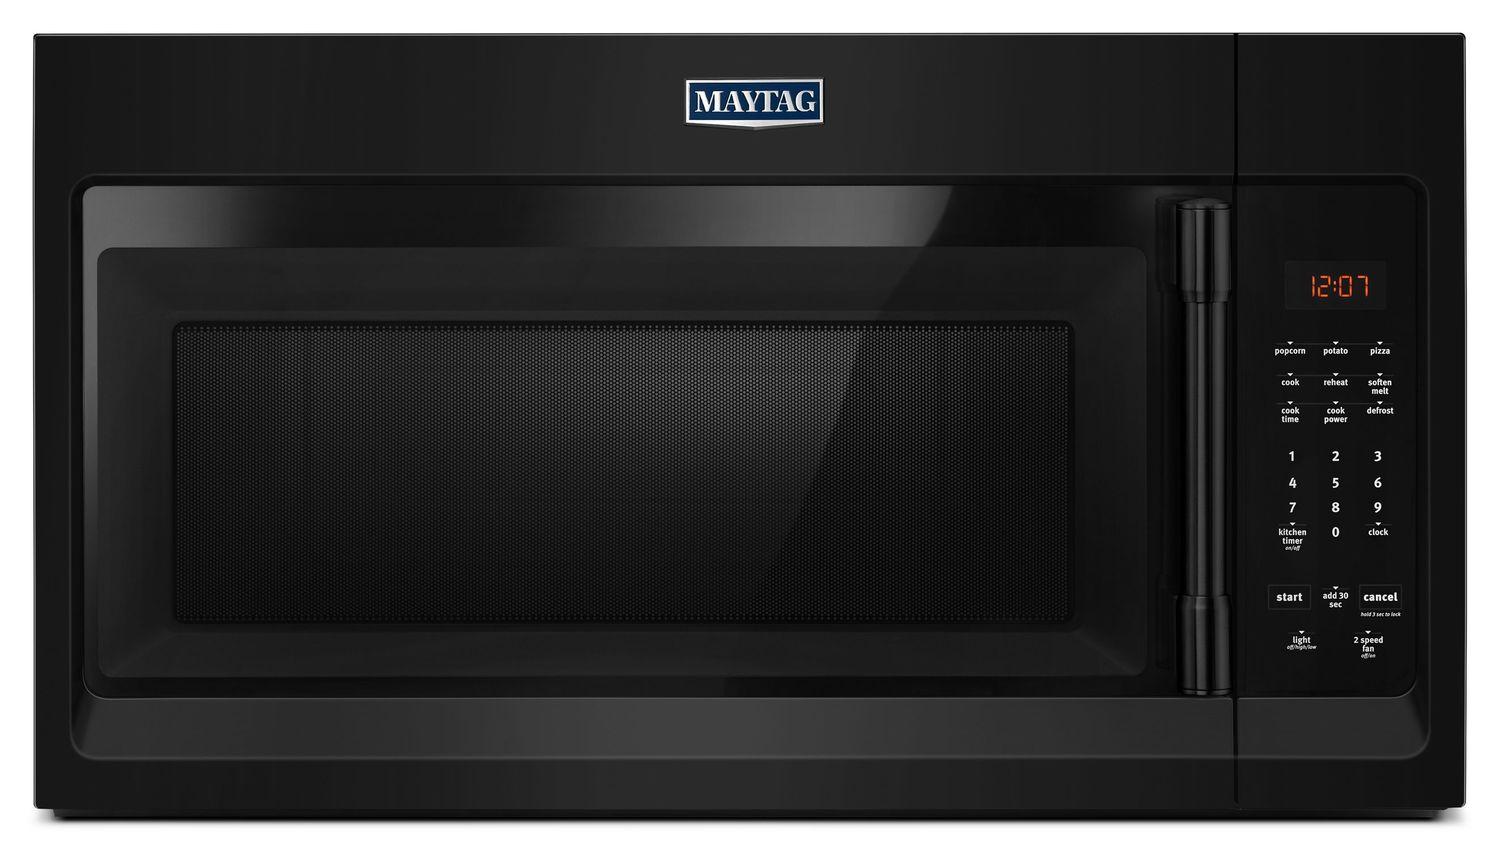 Maytag Compact Over-The-Range Microwave - 1.7 Cu. Ft. Black